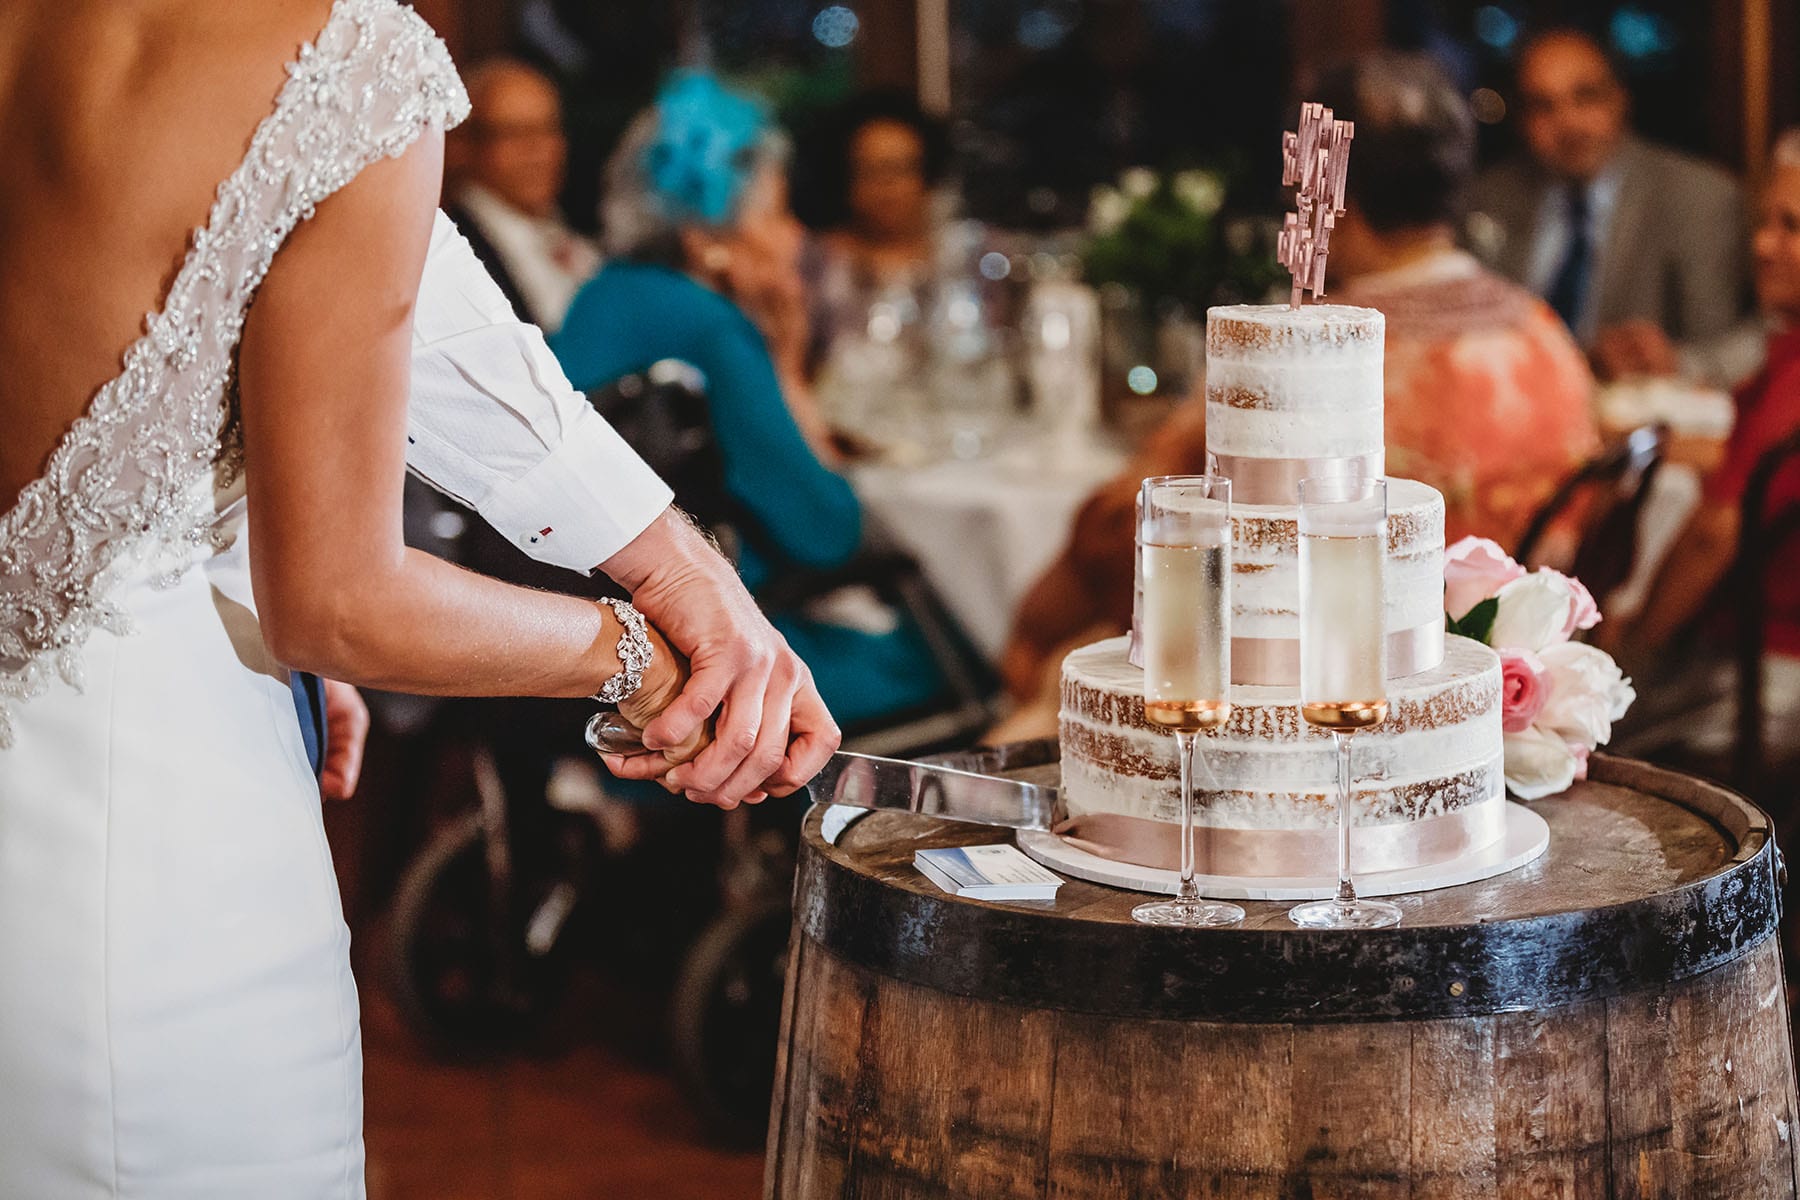 Close up photograph of a couple's hands cutting their wedding cake